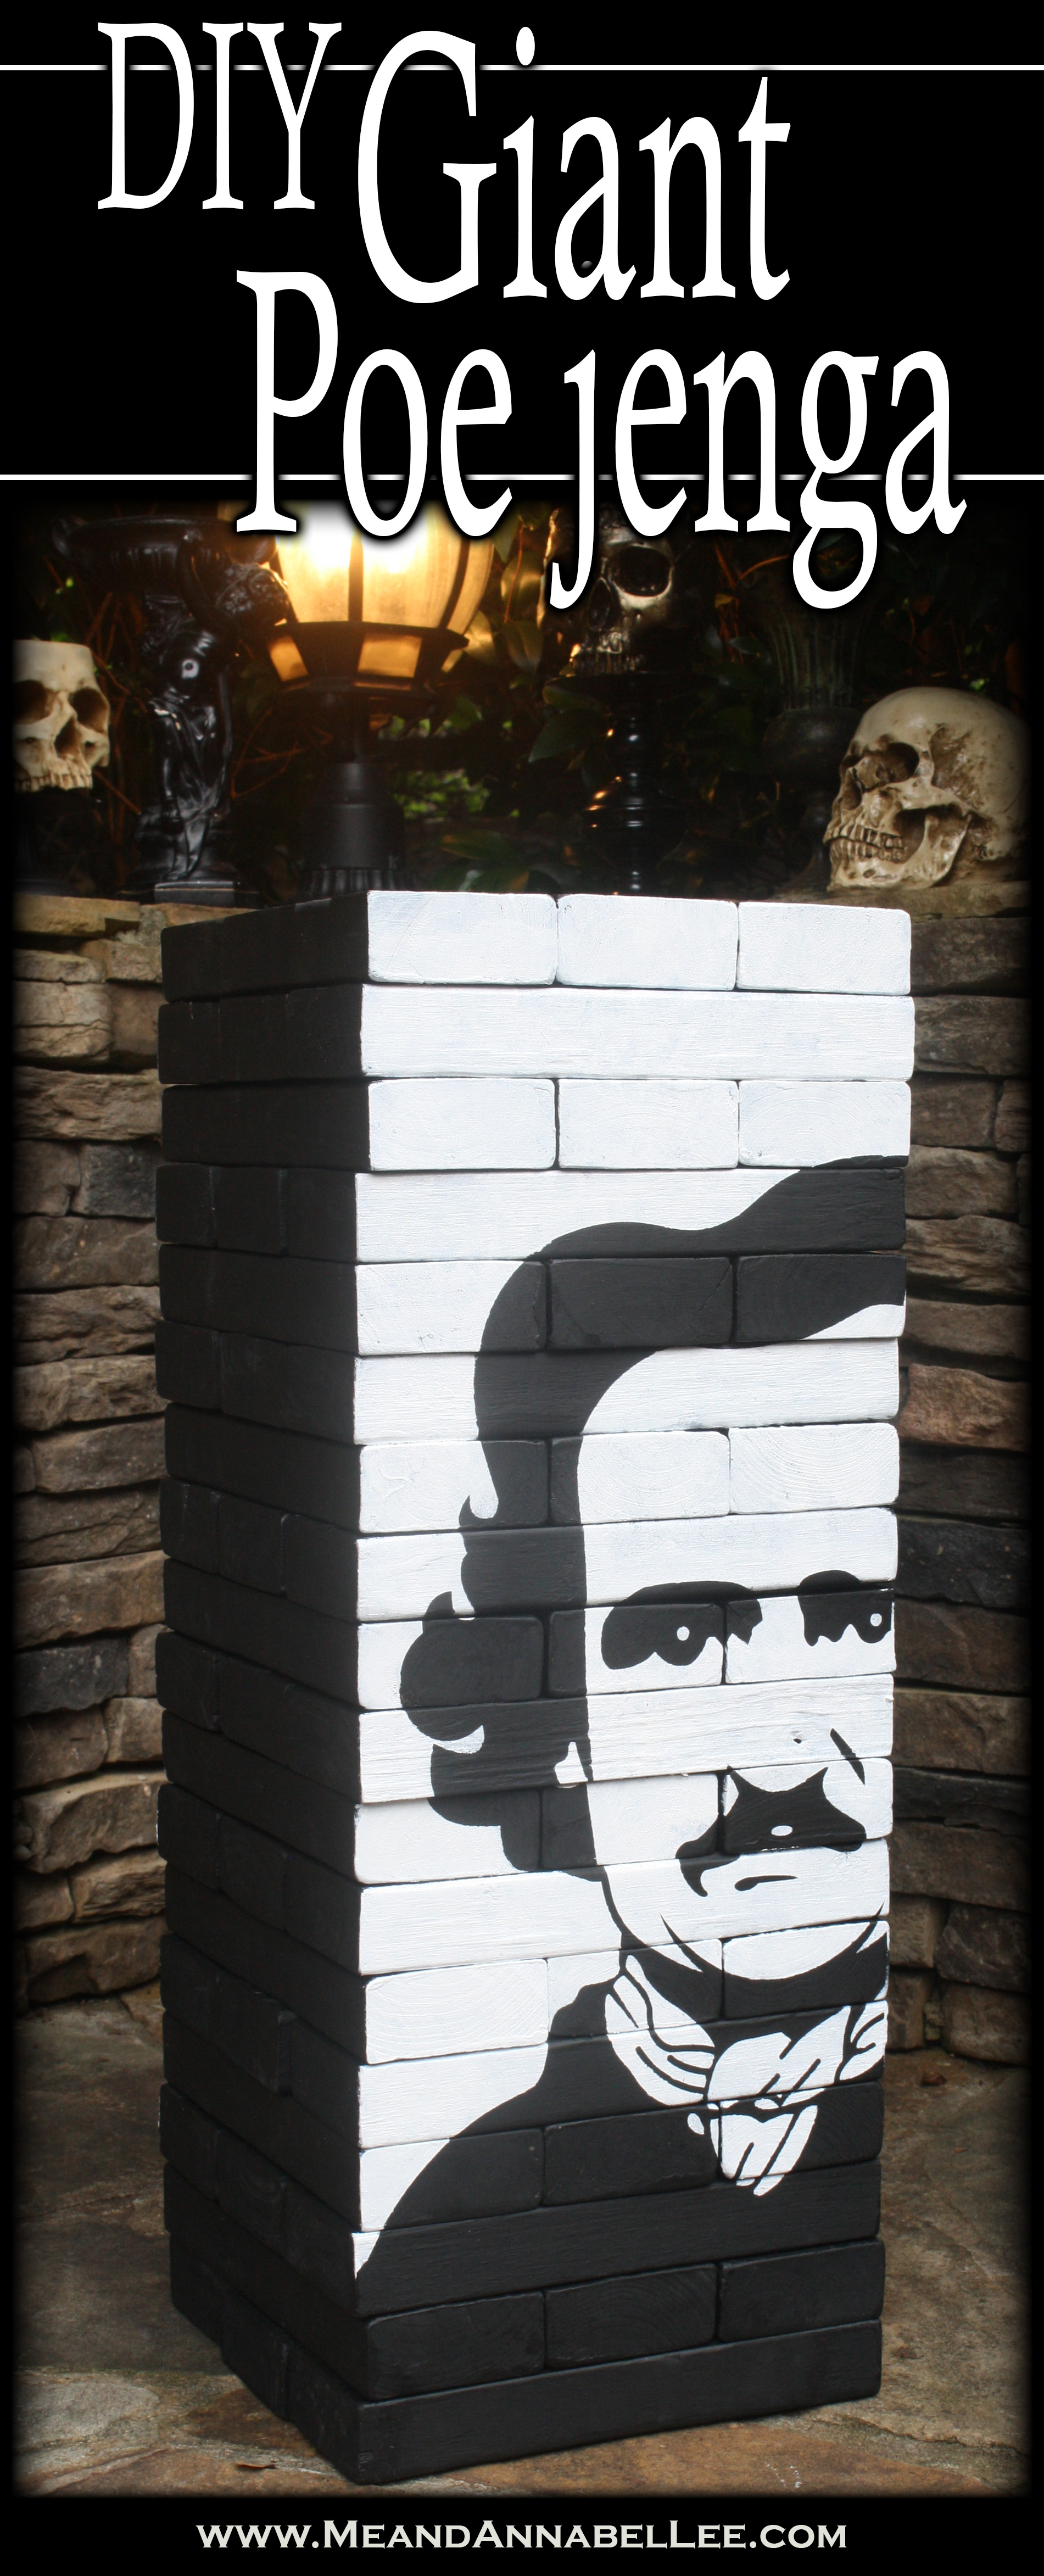 DIY Edgar Allan Poe Giant Jenga | How to Build a Jenga | Gothic Party Games | Cricut Stencil tutorial | www.MeandAnnabelLee.com